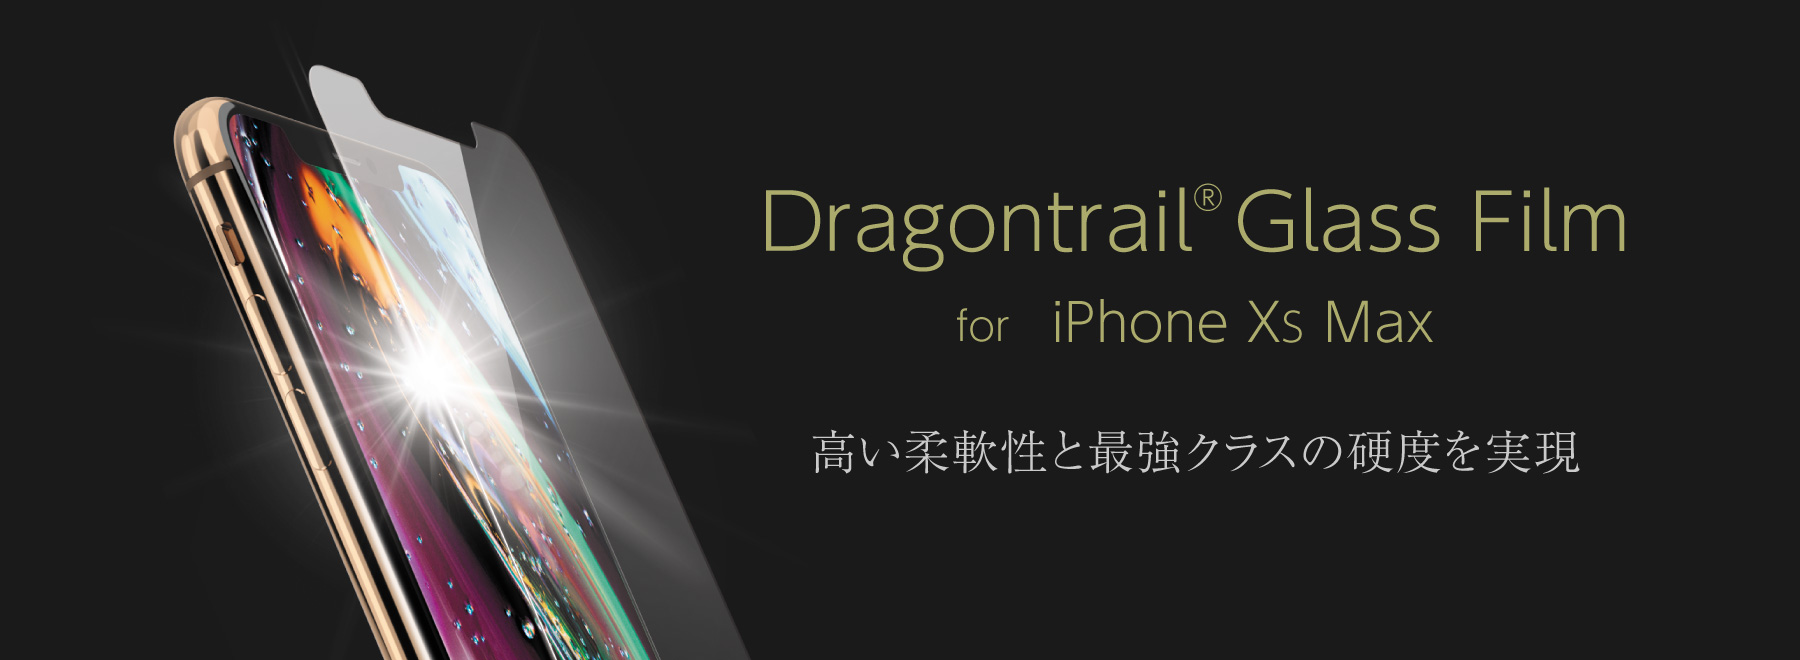 Dragontrail® Glass Film for iPhone XS Max, XR